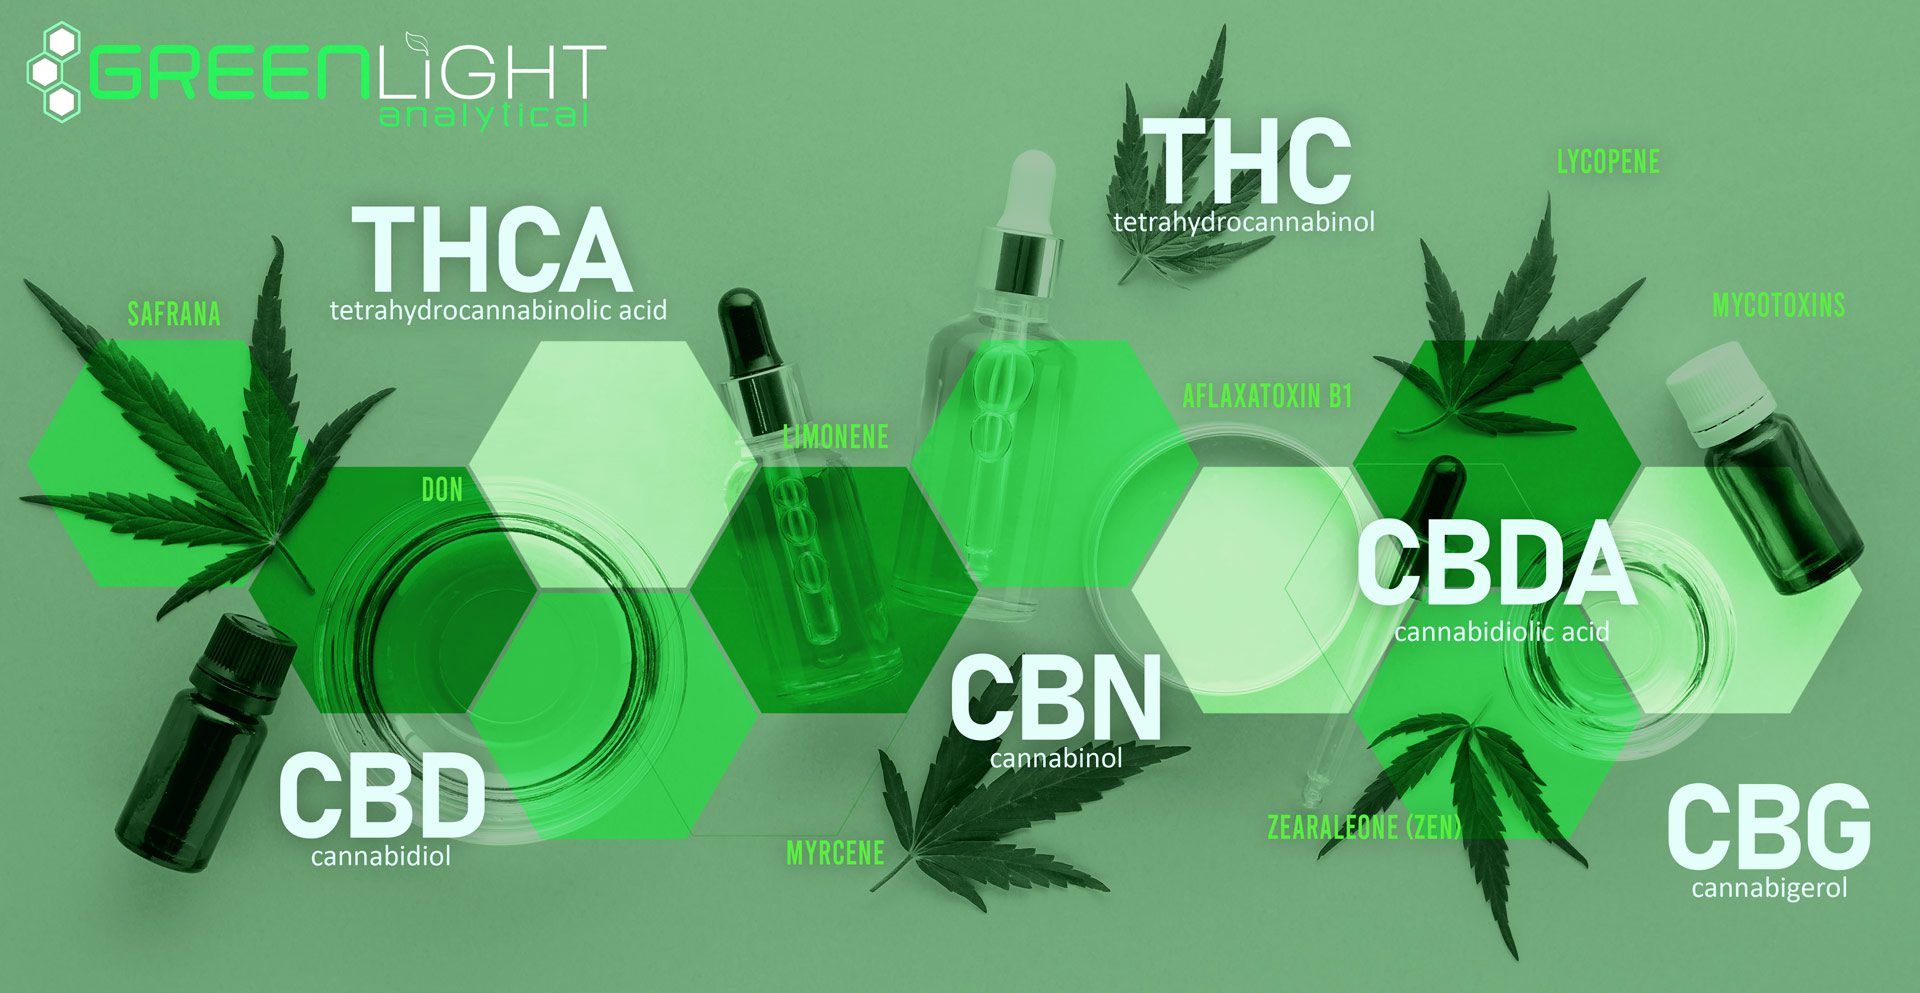 Greenlight Analytical - Growing quality cannabis using data driven decisions